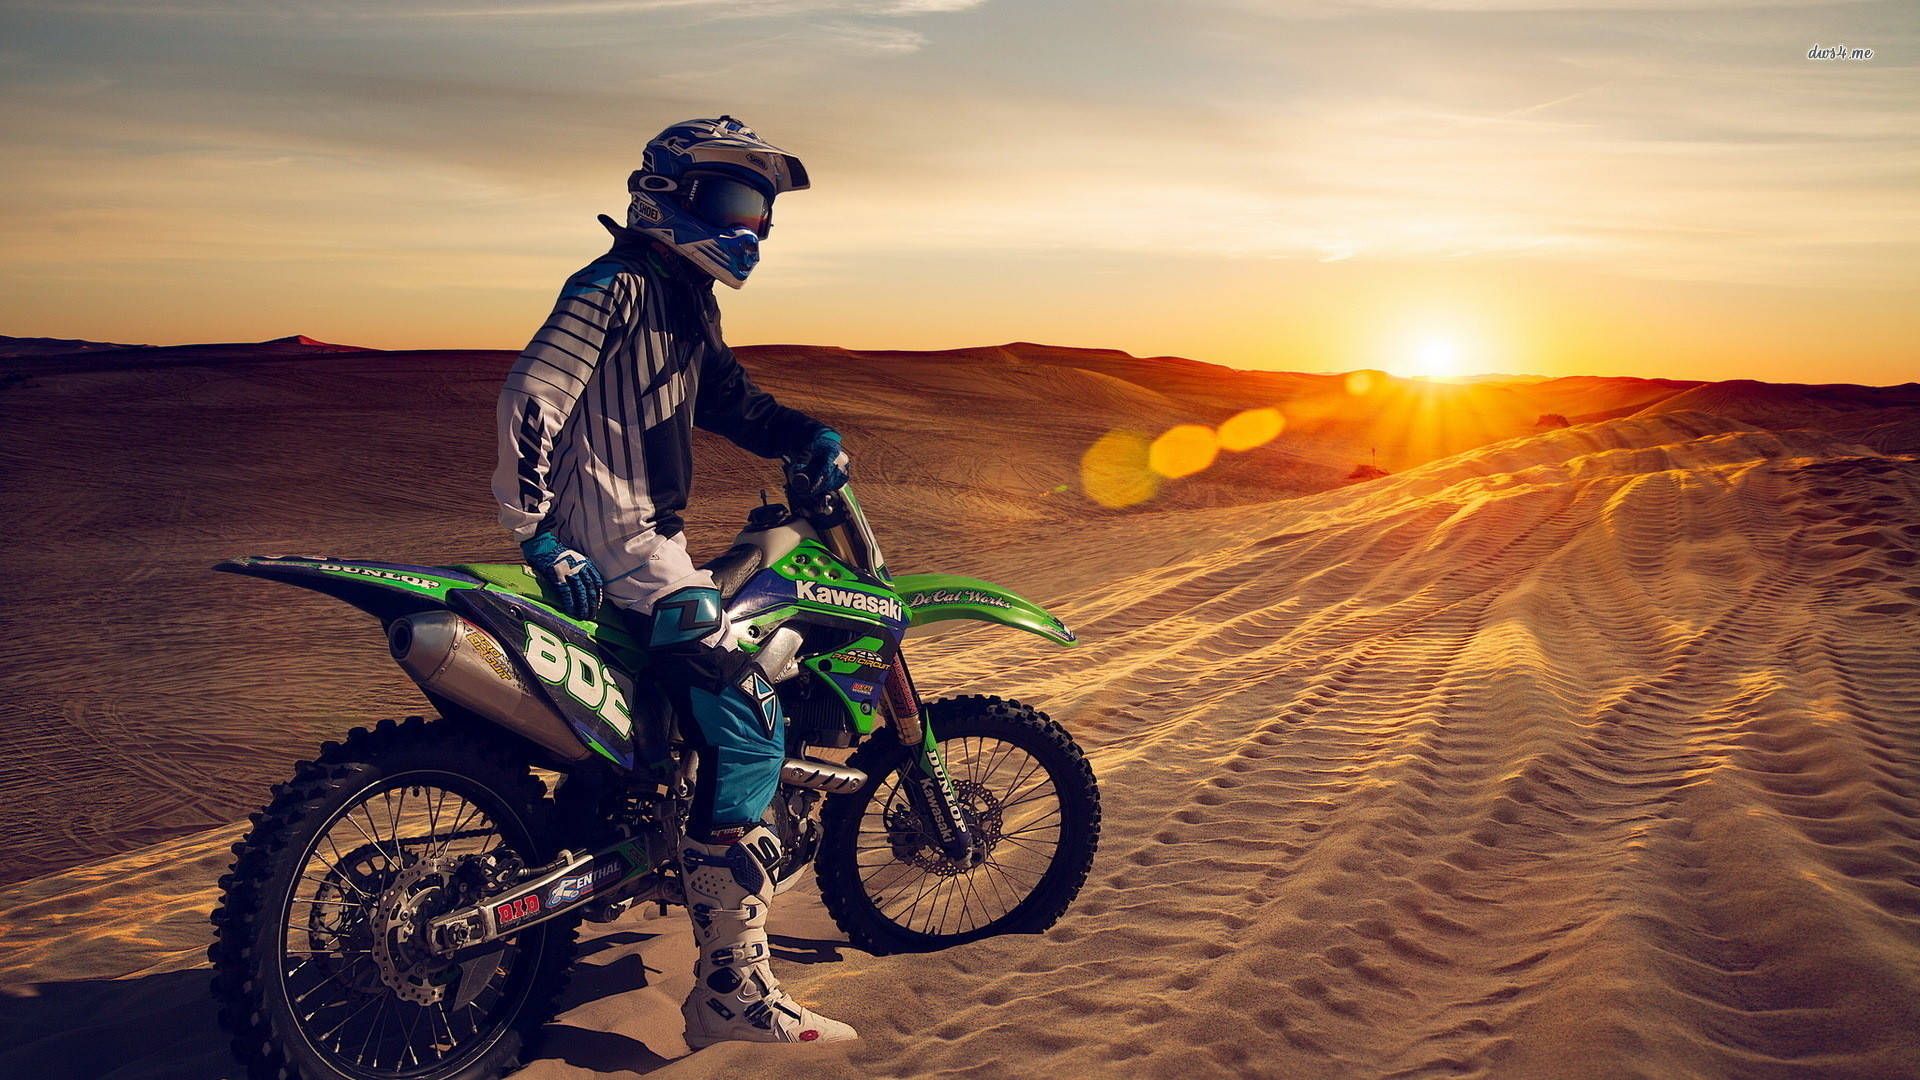 Thrilling Ride with the Monster Dirt Bike Wallpaper